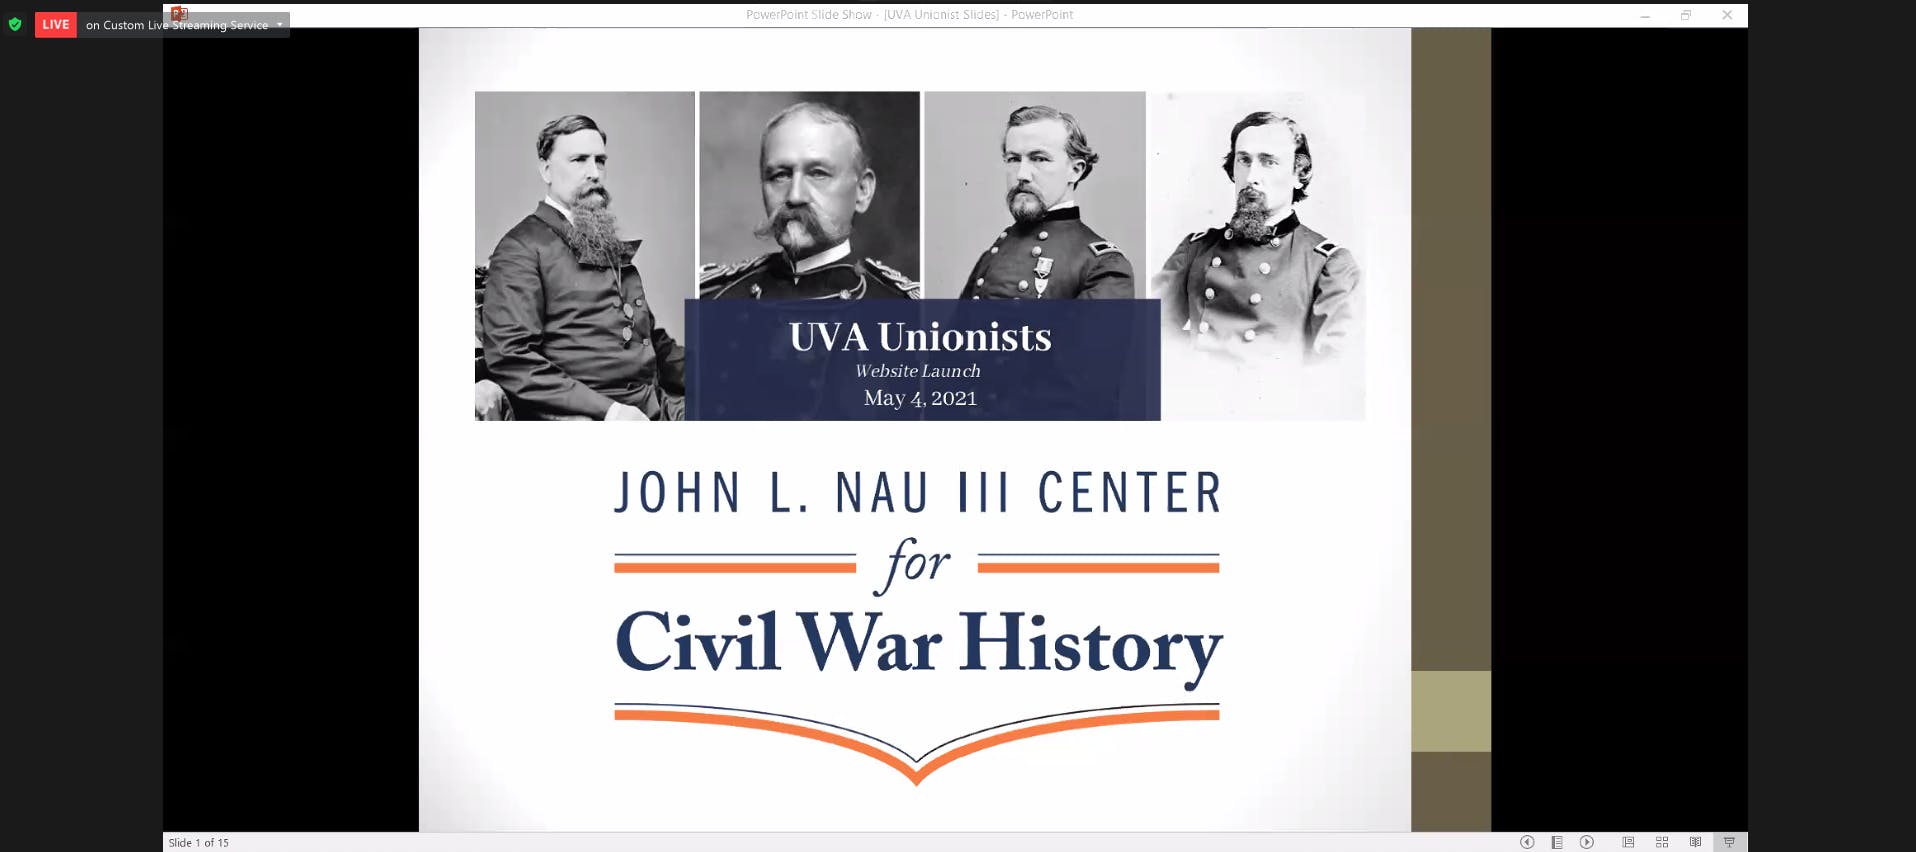 army and navy of the union during the civil war